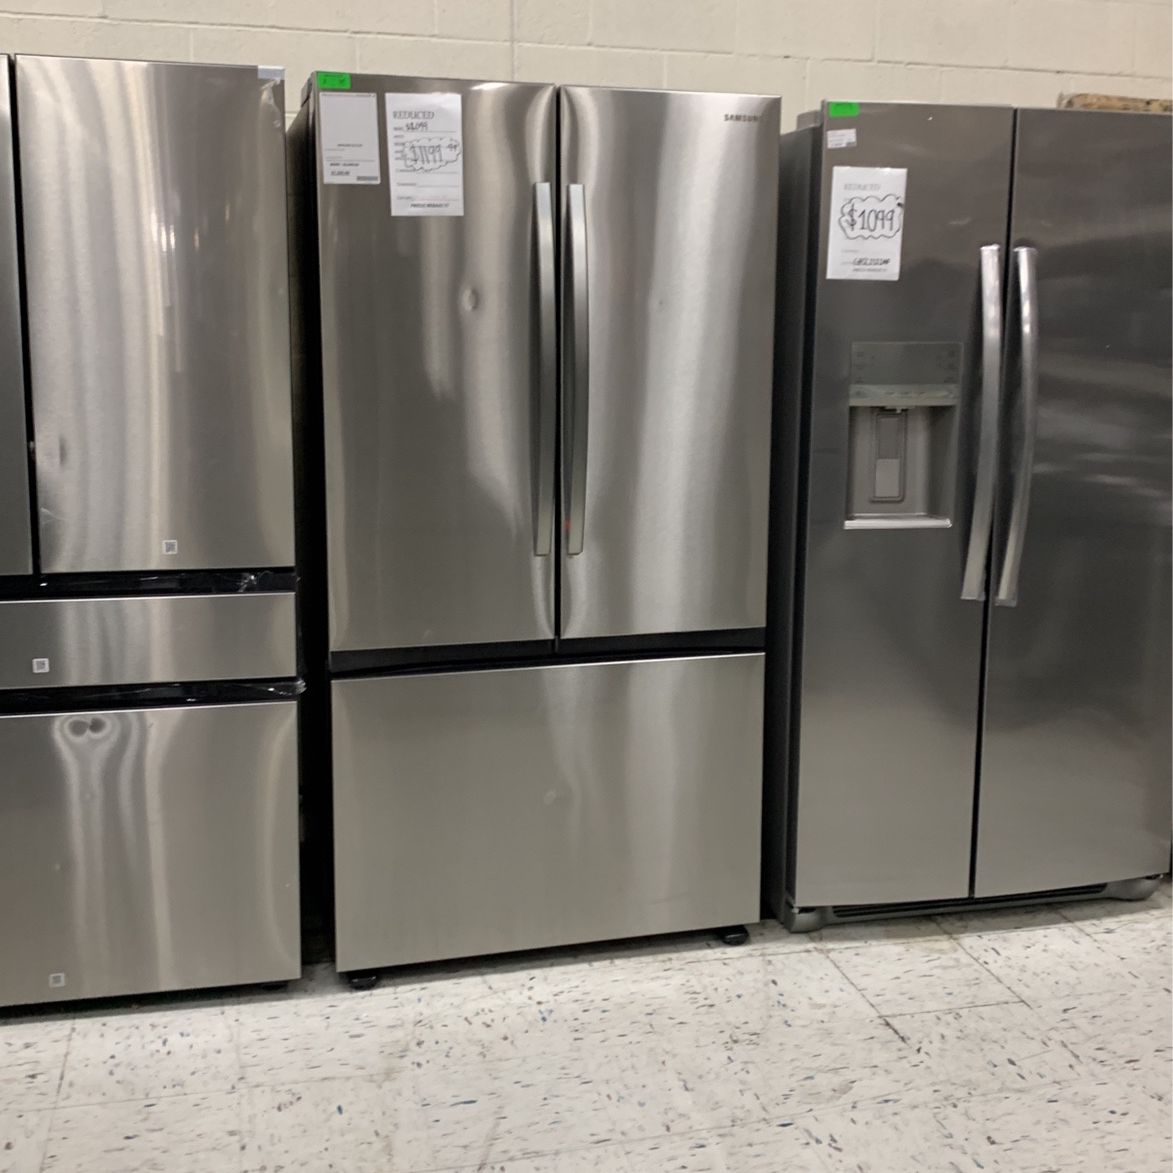 Samsung French Door Refrigerator With Dual Ice Maker 